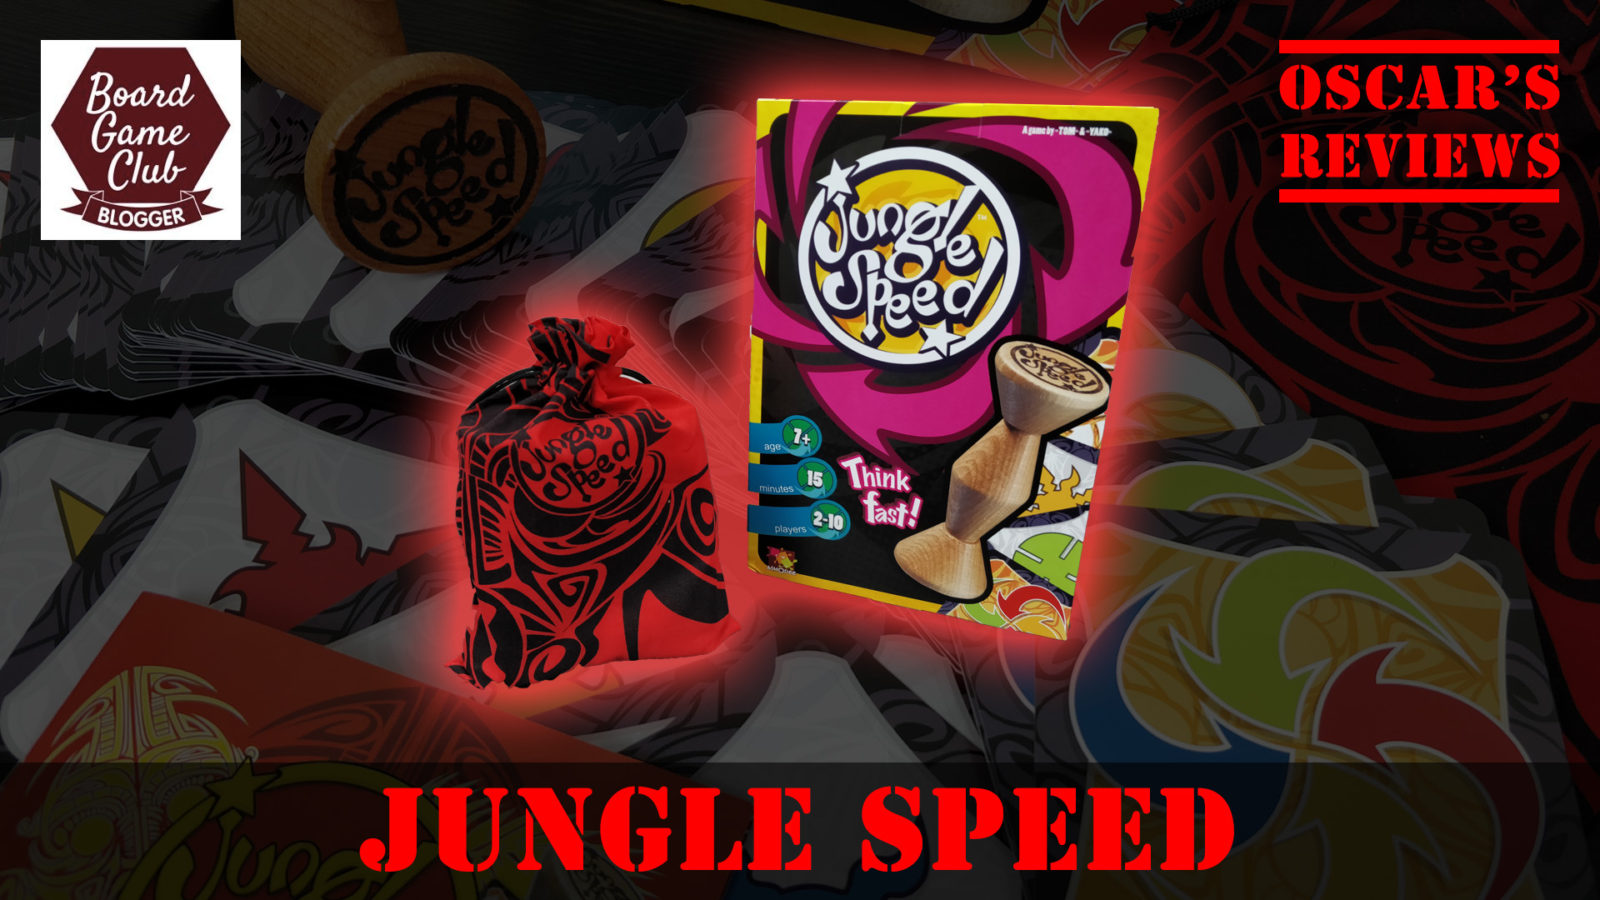 Trying Out the Jungle Speed Game – Are We Fast Enough?